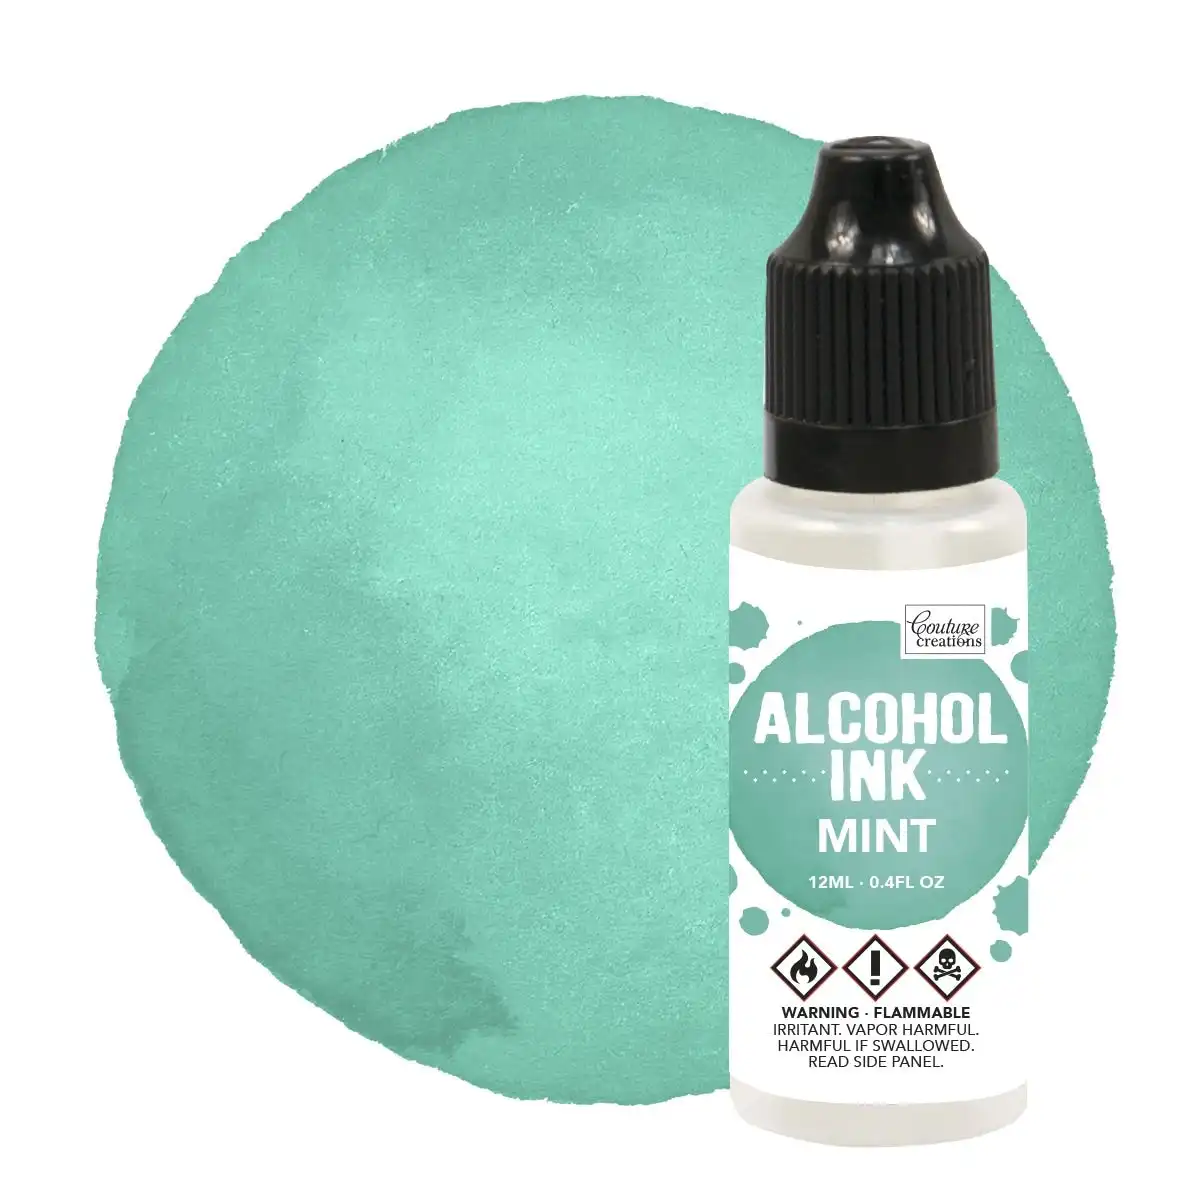 Couture Creations Alcohol Ink - Mint (Formerly Named Pistachio)- 12ml